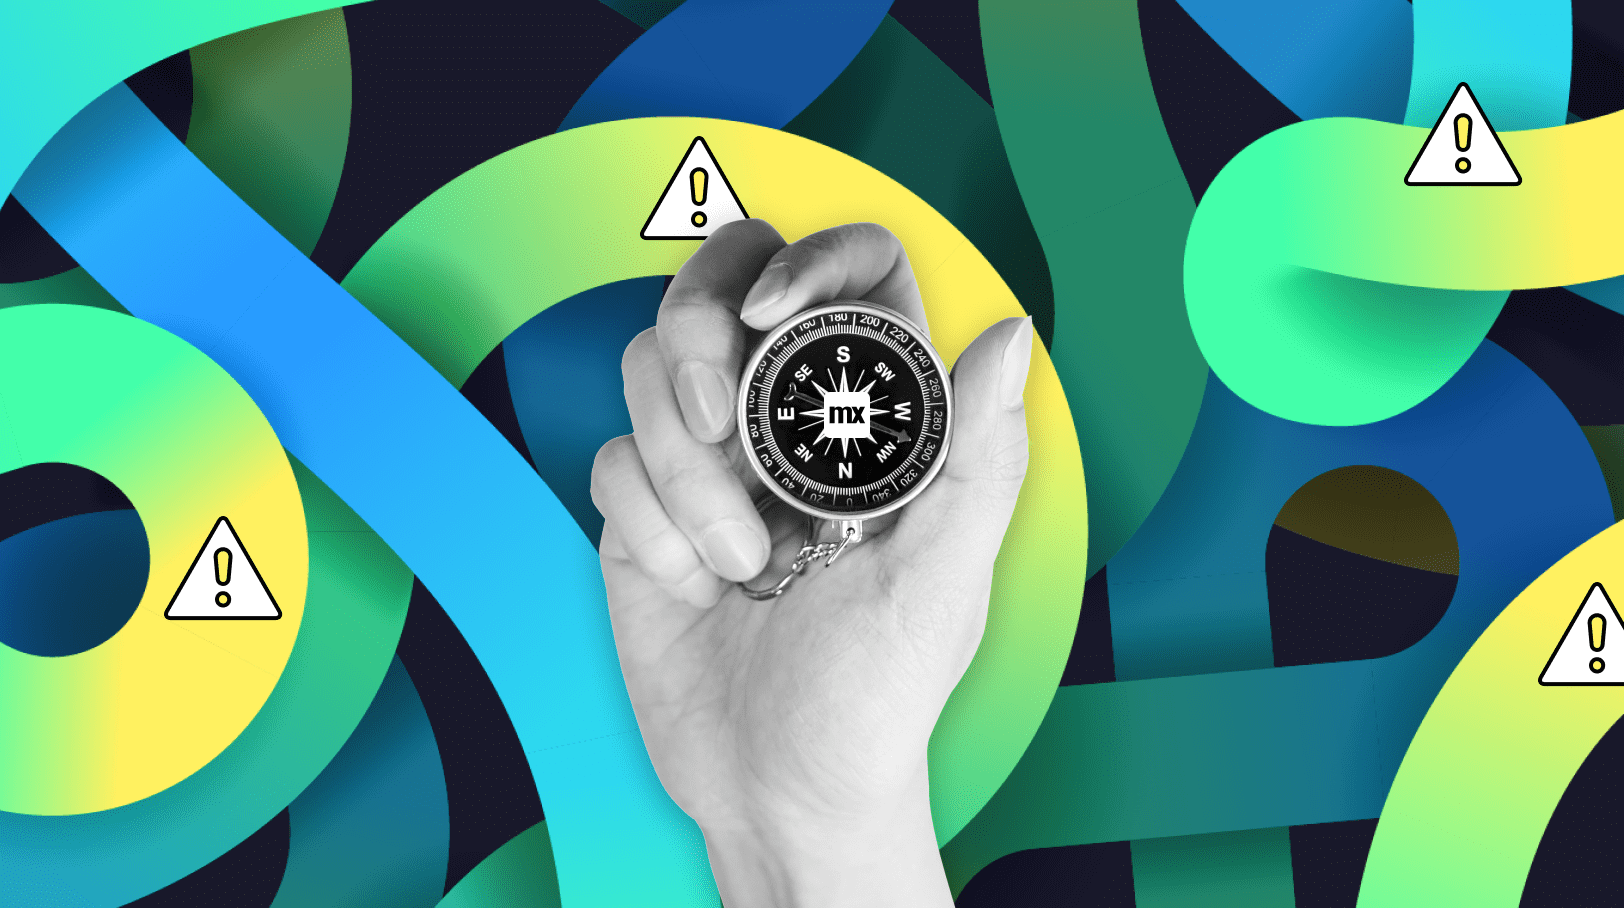 Hand holding a mendix branded compass